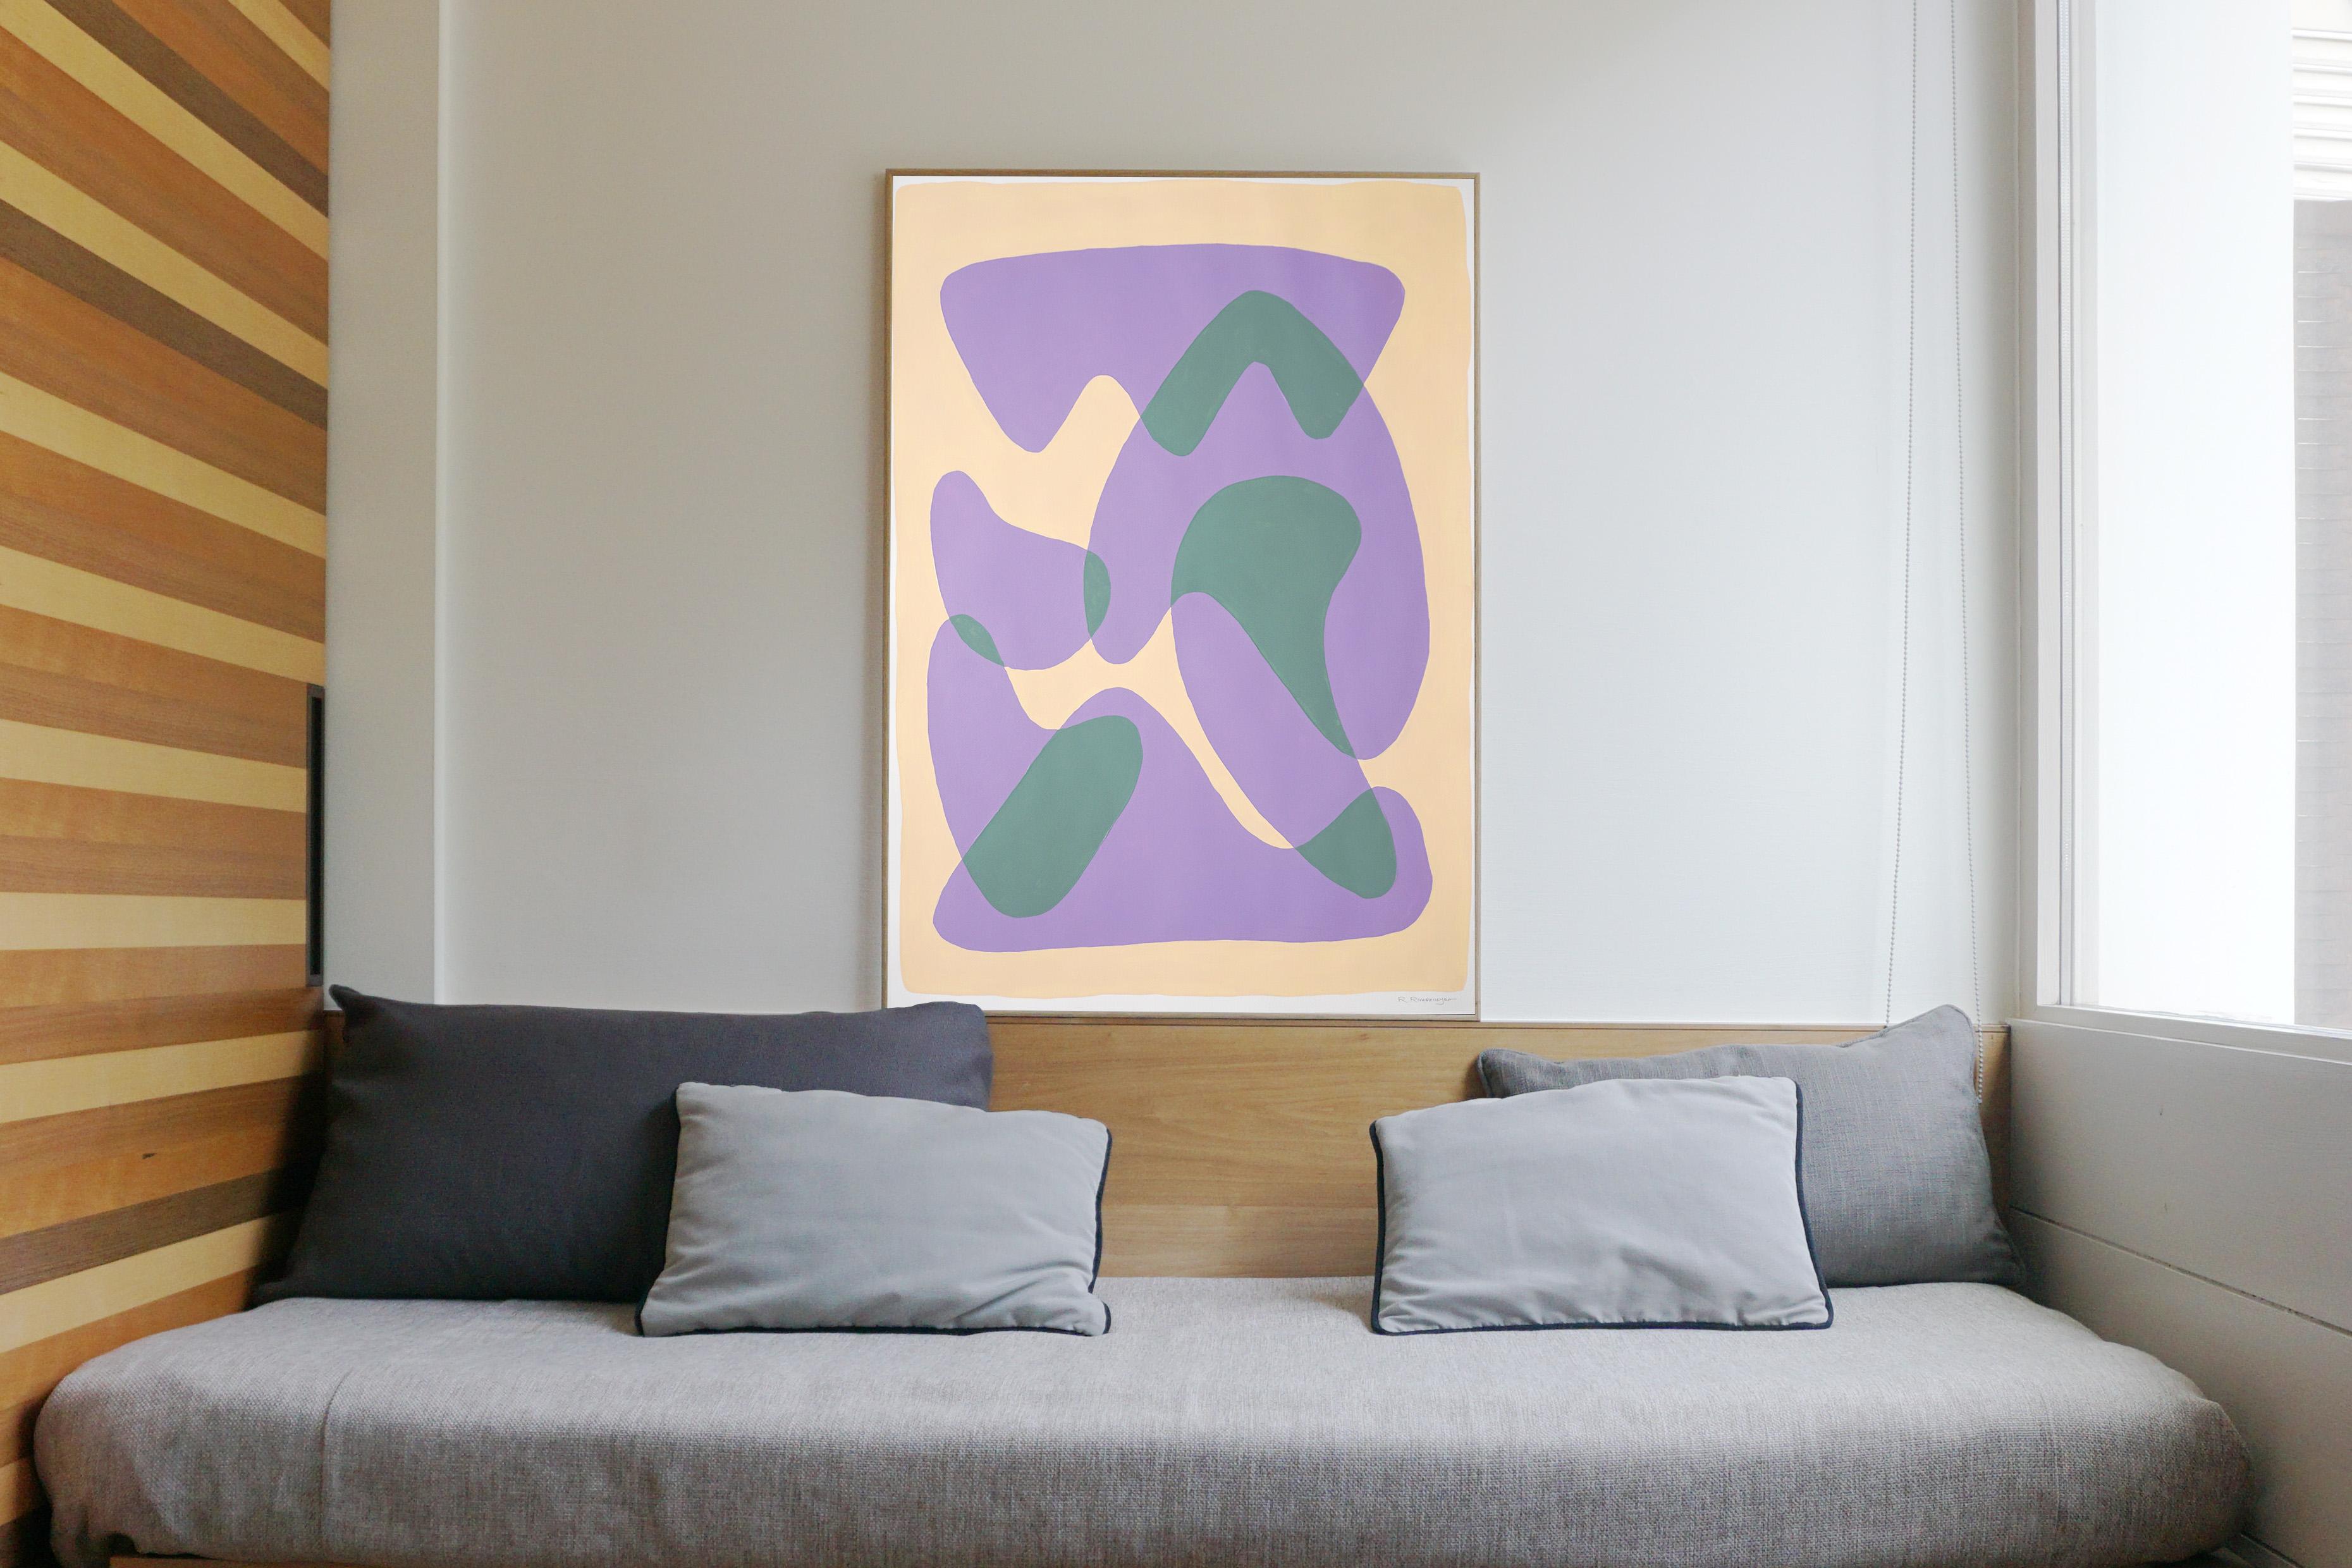 Modern Native Shapes in Mauve and Green, Tan Background, Mid-Century Style, 2022 - Painting by Ryan Rivadeneyra